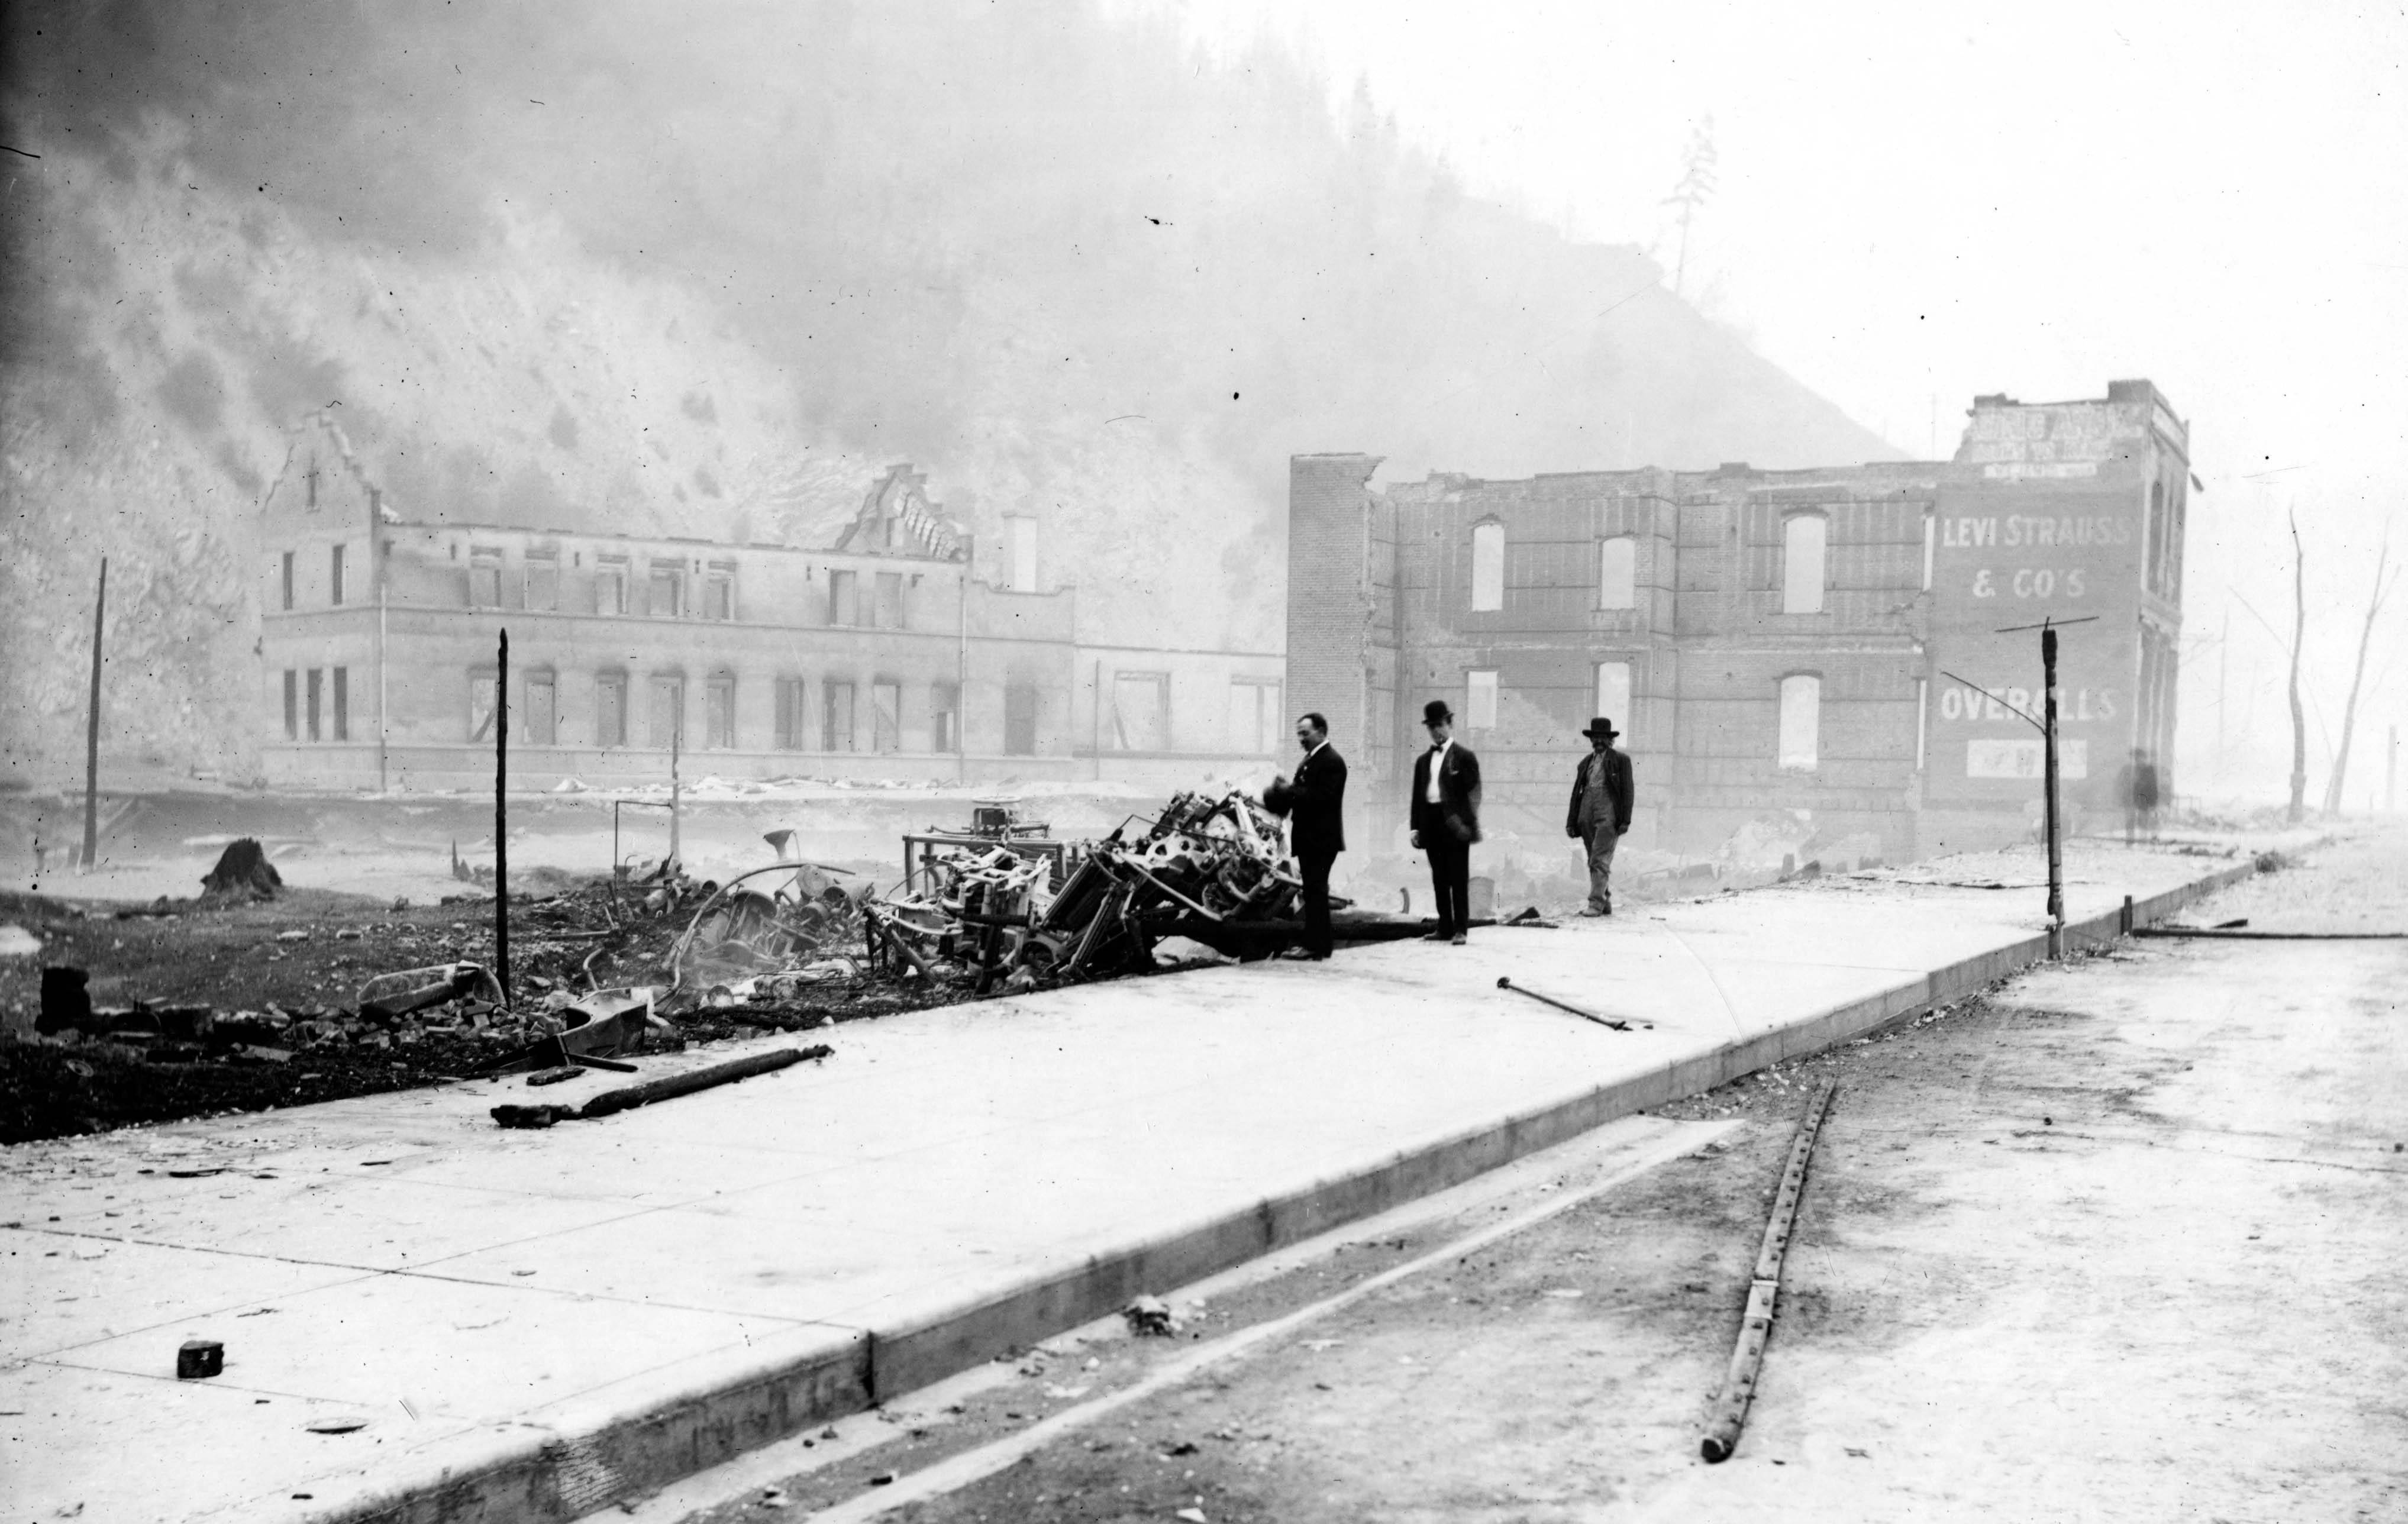 Forest Fire 1910 - Wallace, Idaho Remains of brick building at 721 Bank and, in background, O.R. & N depot, after fire of August 20.

